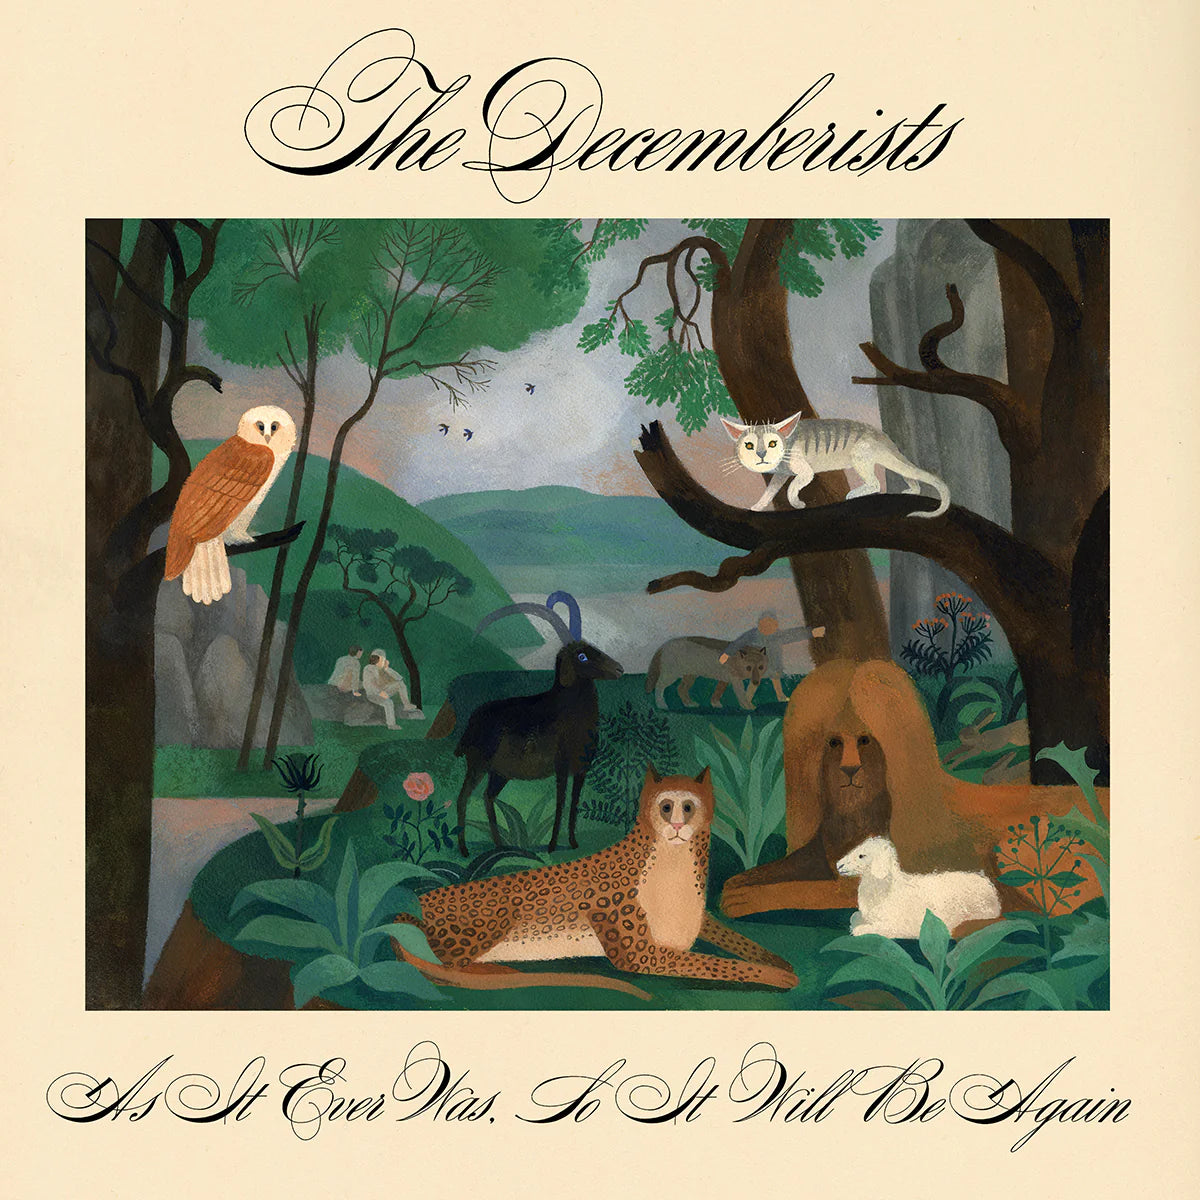 The Decemberists - As It Ever Was, So It Will Be Again: Vinyl 2LP